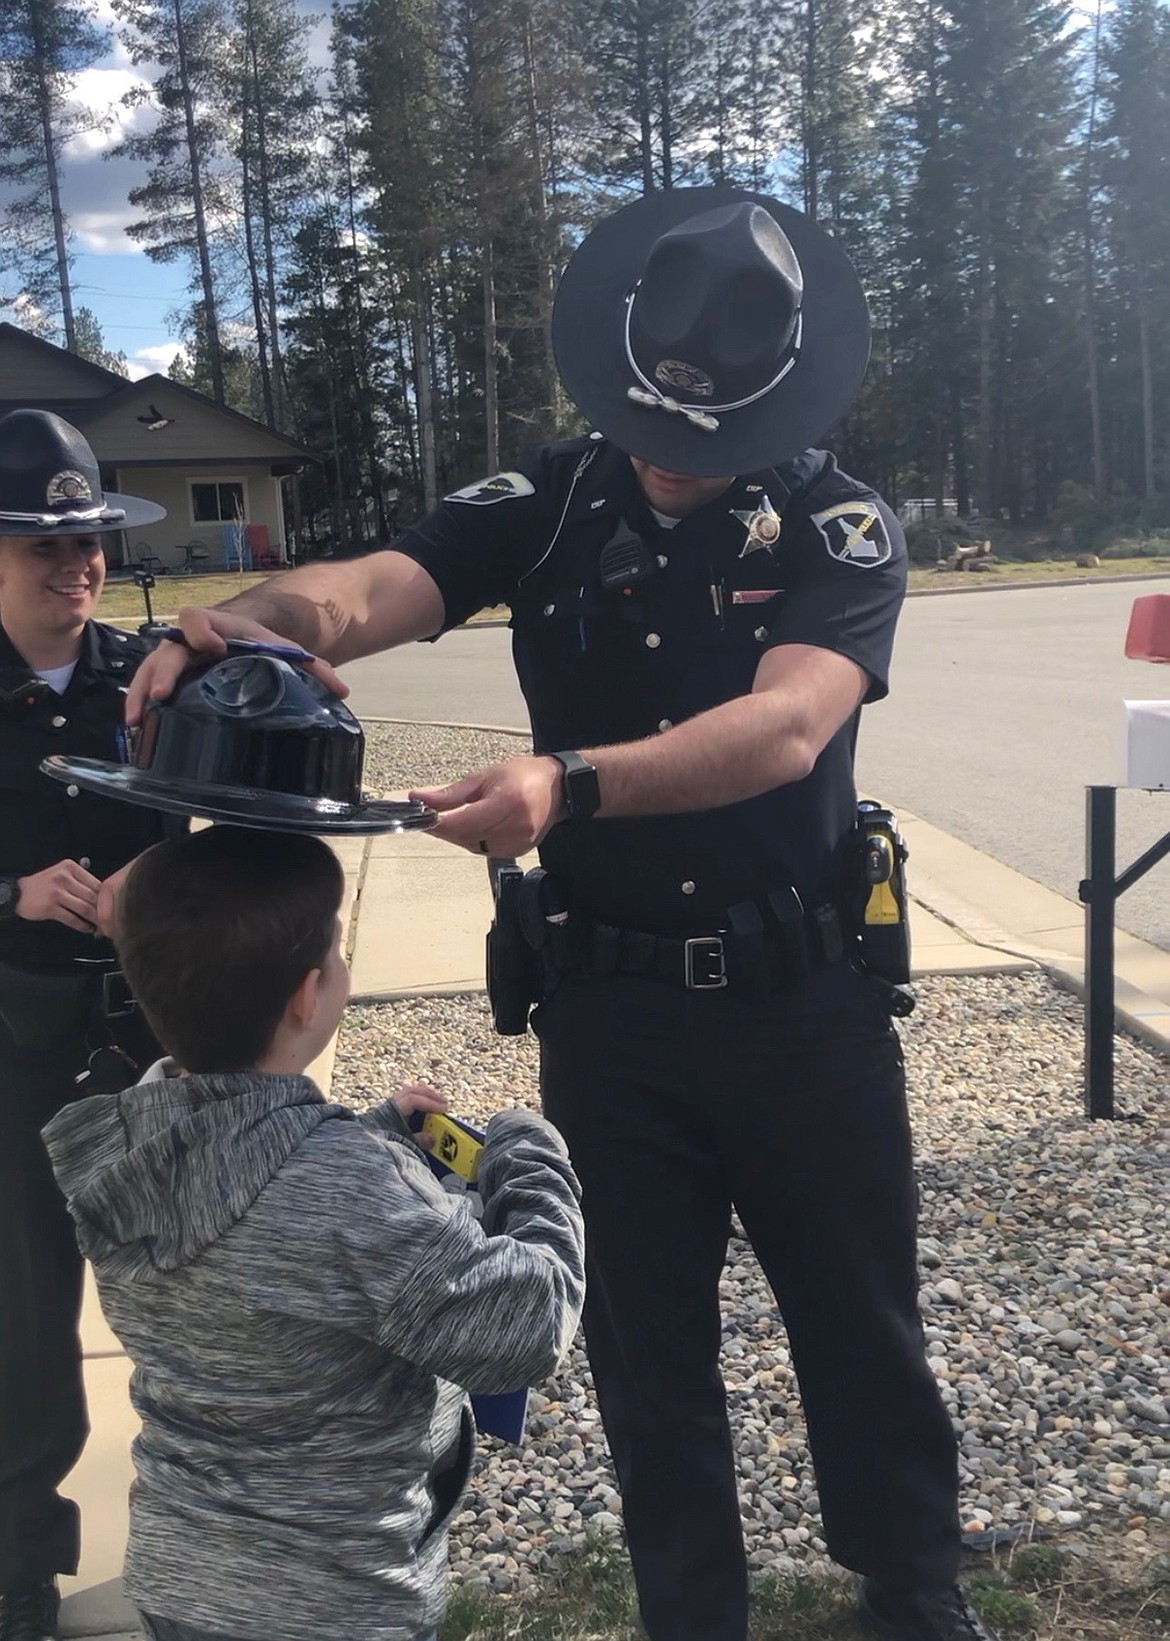 An Idaho State Police trooper gives Jackson Reynold his own “covers” as after a special parade to wish the now-8-year-old a happy birthday. His original birthday party had to be canceled because of the stay-at-home order issued in Idaho as a result of the COVID-19 pandemic.